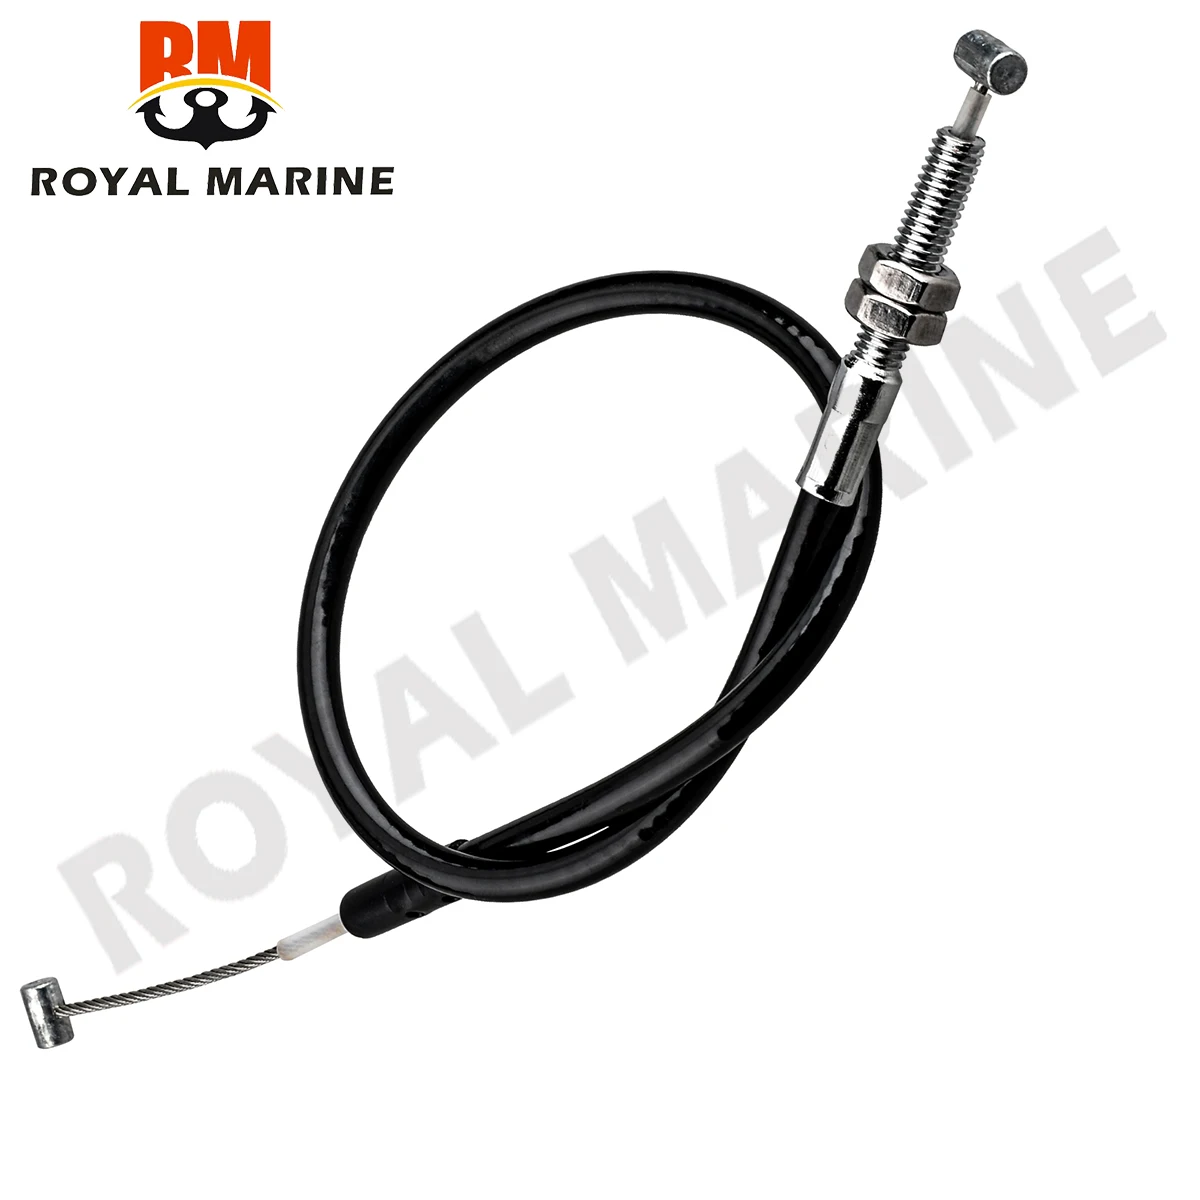 Cable, throttle (Throttle Handle Cable) for Suzuki Outboard DT 15HP 9.9HP 20HP 25HP 30HP 63610-96321 63610-96321-000 boat motor